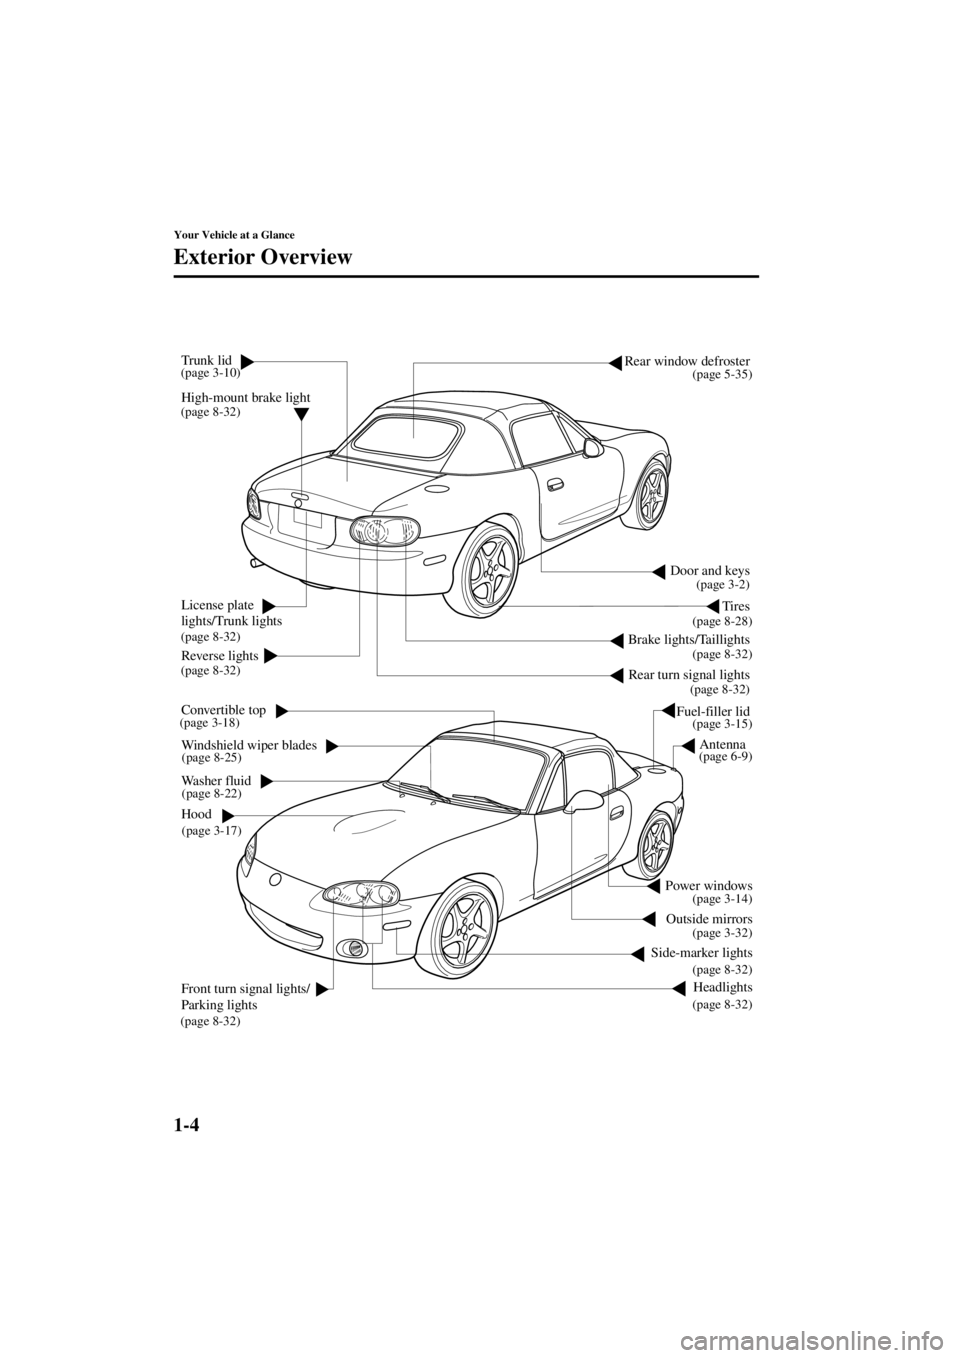 MAZDA MODEL SPEED MX-5 MIATA 2004  Owners Manual 1-4
Your Vehicle at a Glance
Form No. 8T02-EA-03L
Exterior Overview
Door and keys
Outside mirrors
Side-marker lights
Headlights
Fuel-filler lid
Tires
Windshield wiper blades
Washer fluid
Hood
Front tu